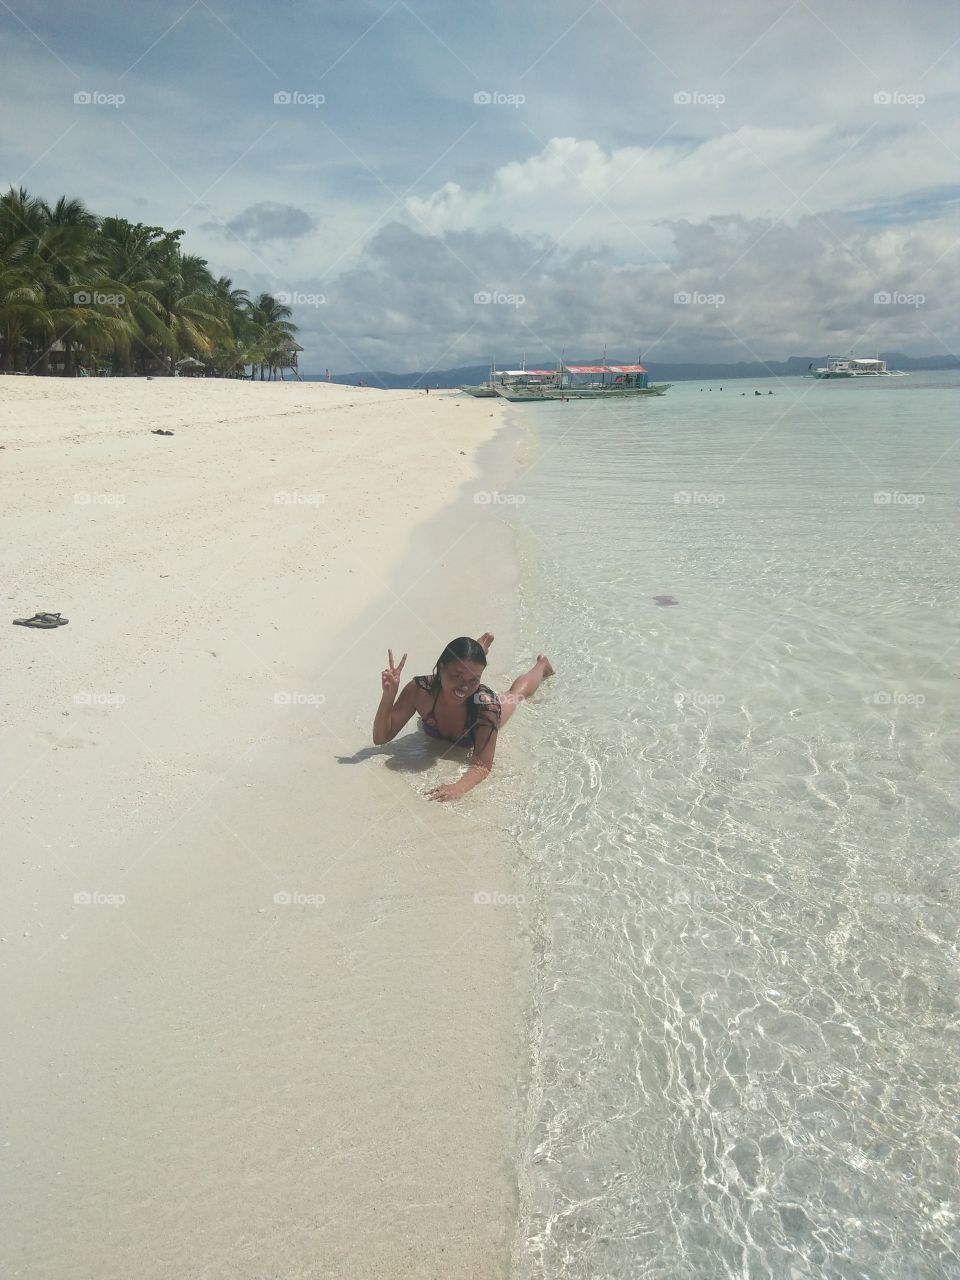 sun bathing with the clear water and the white sand in kalanggaman island